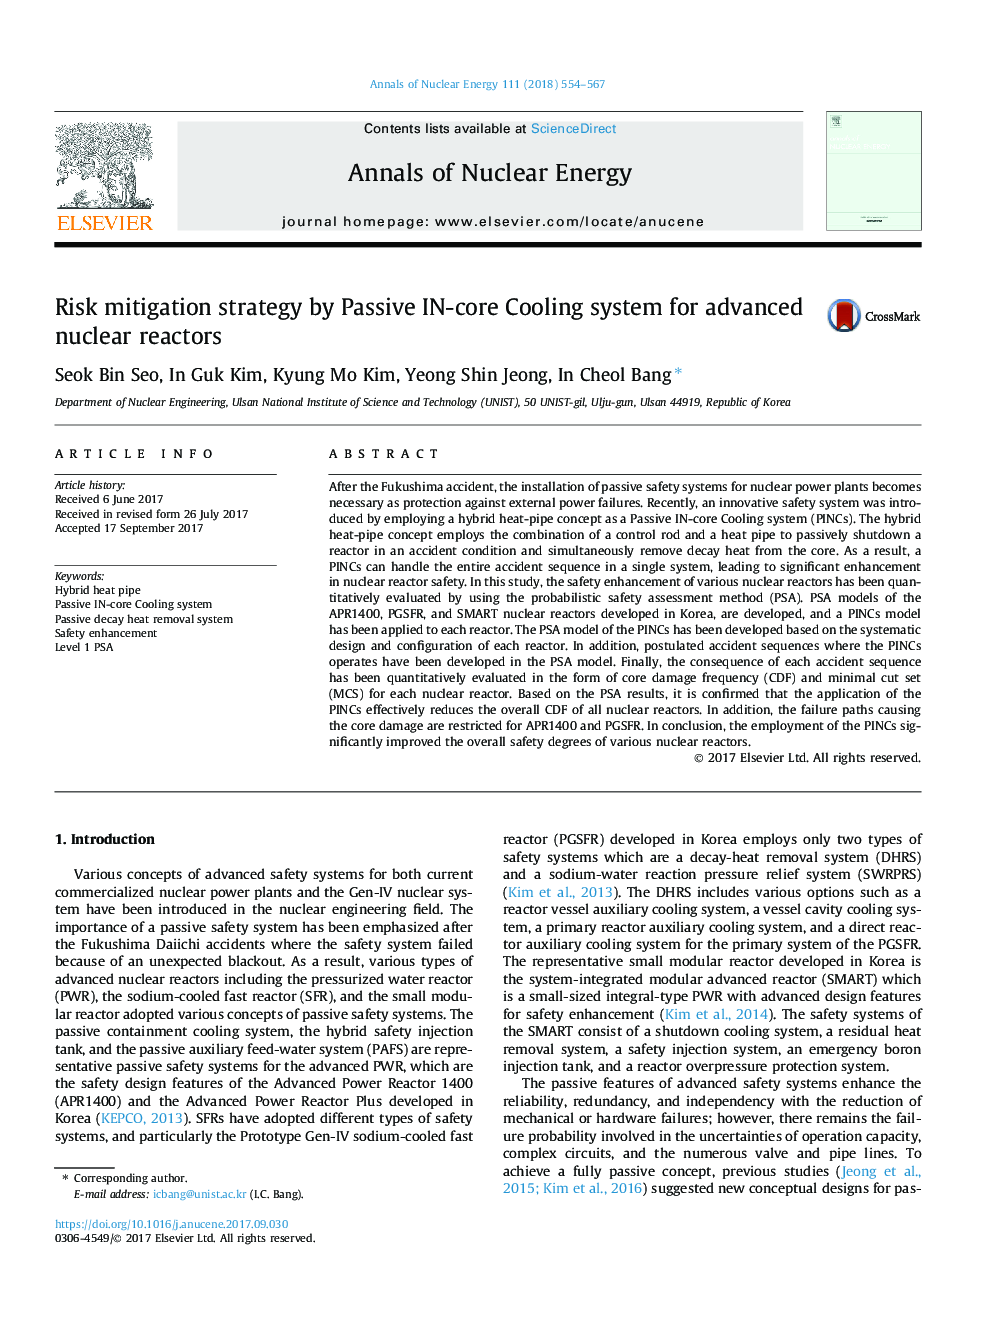 Risk mitigation strategy by Passive IN-core Cooling system for advanced nuclear reactors